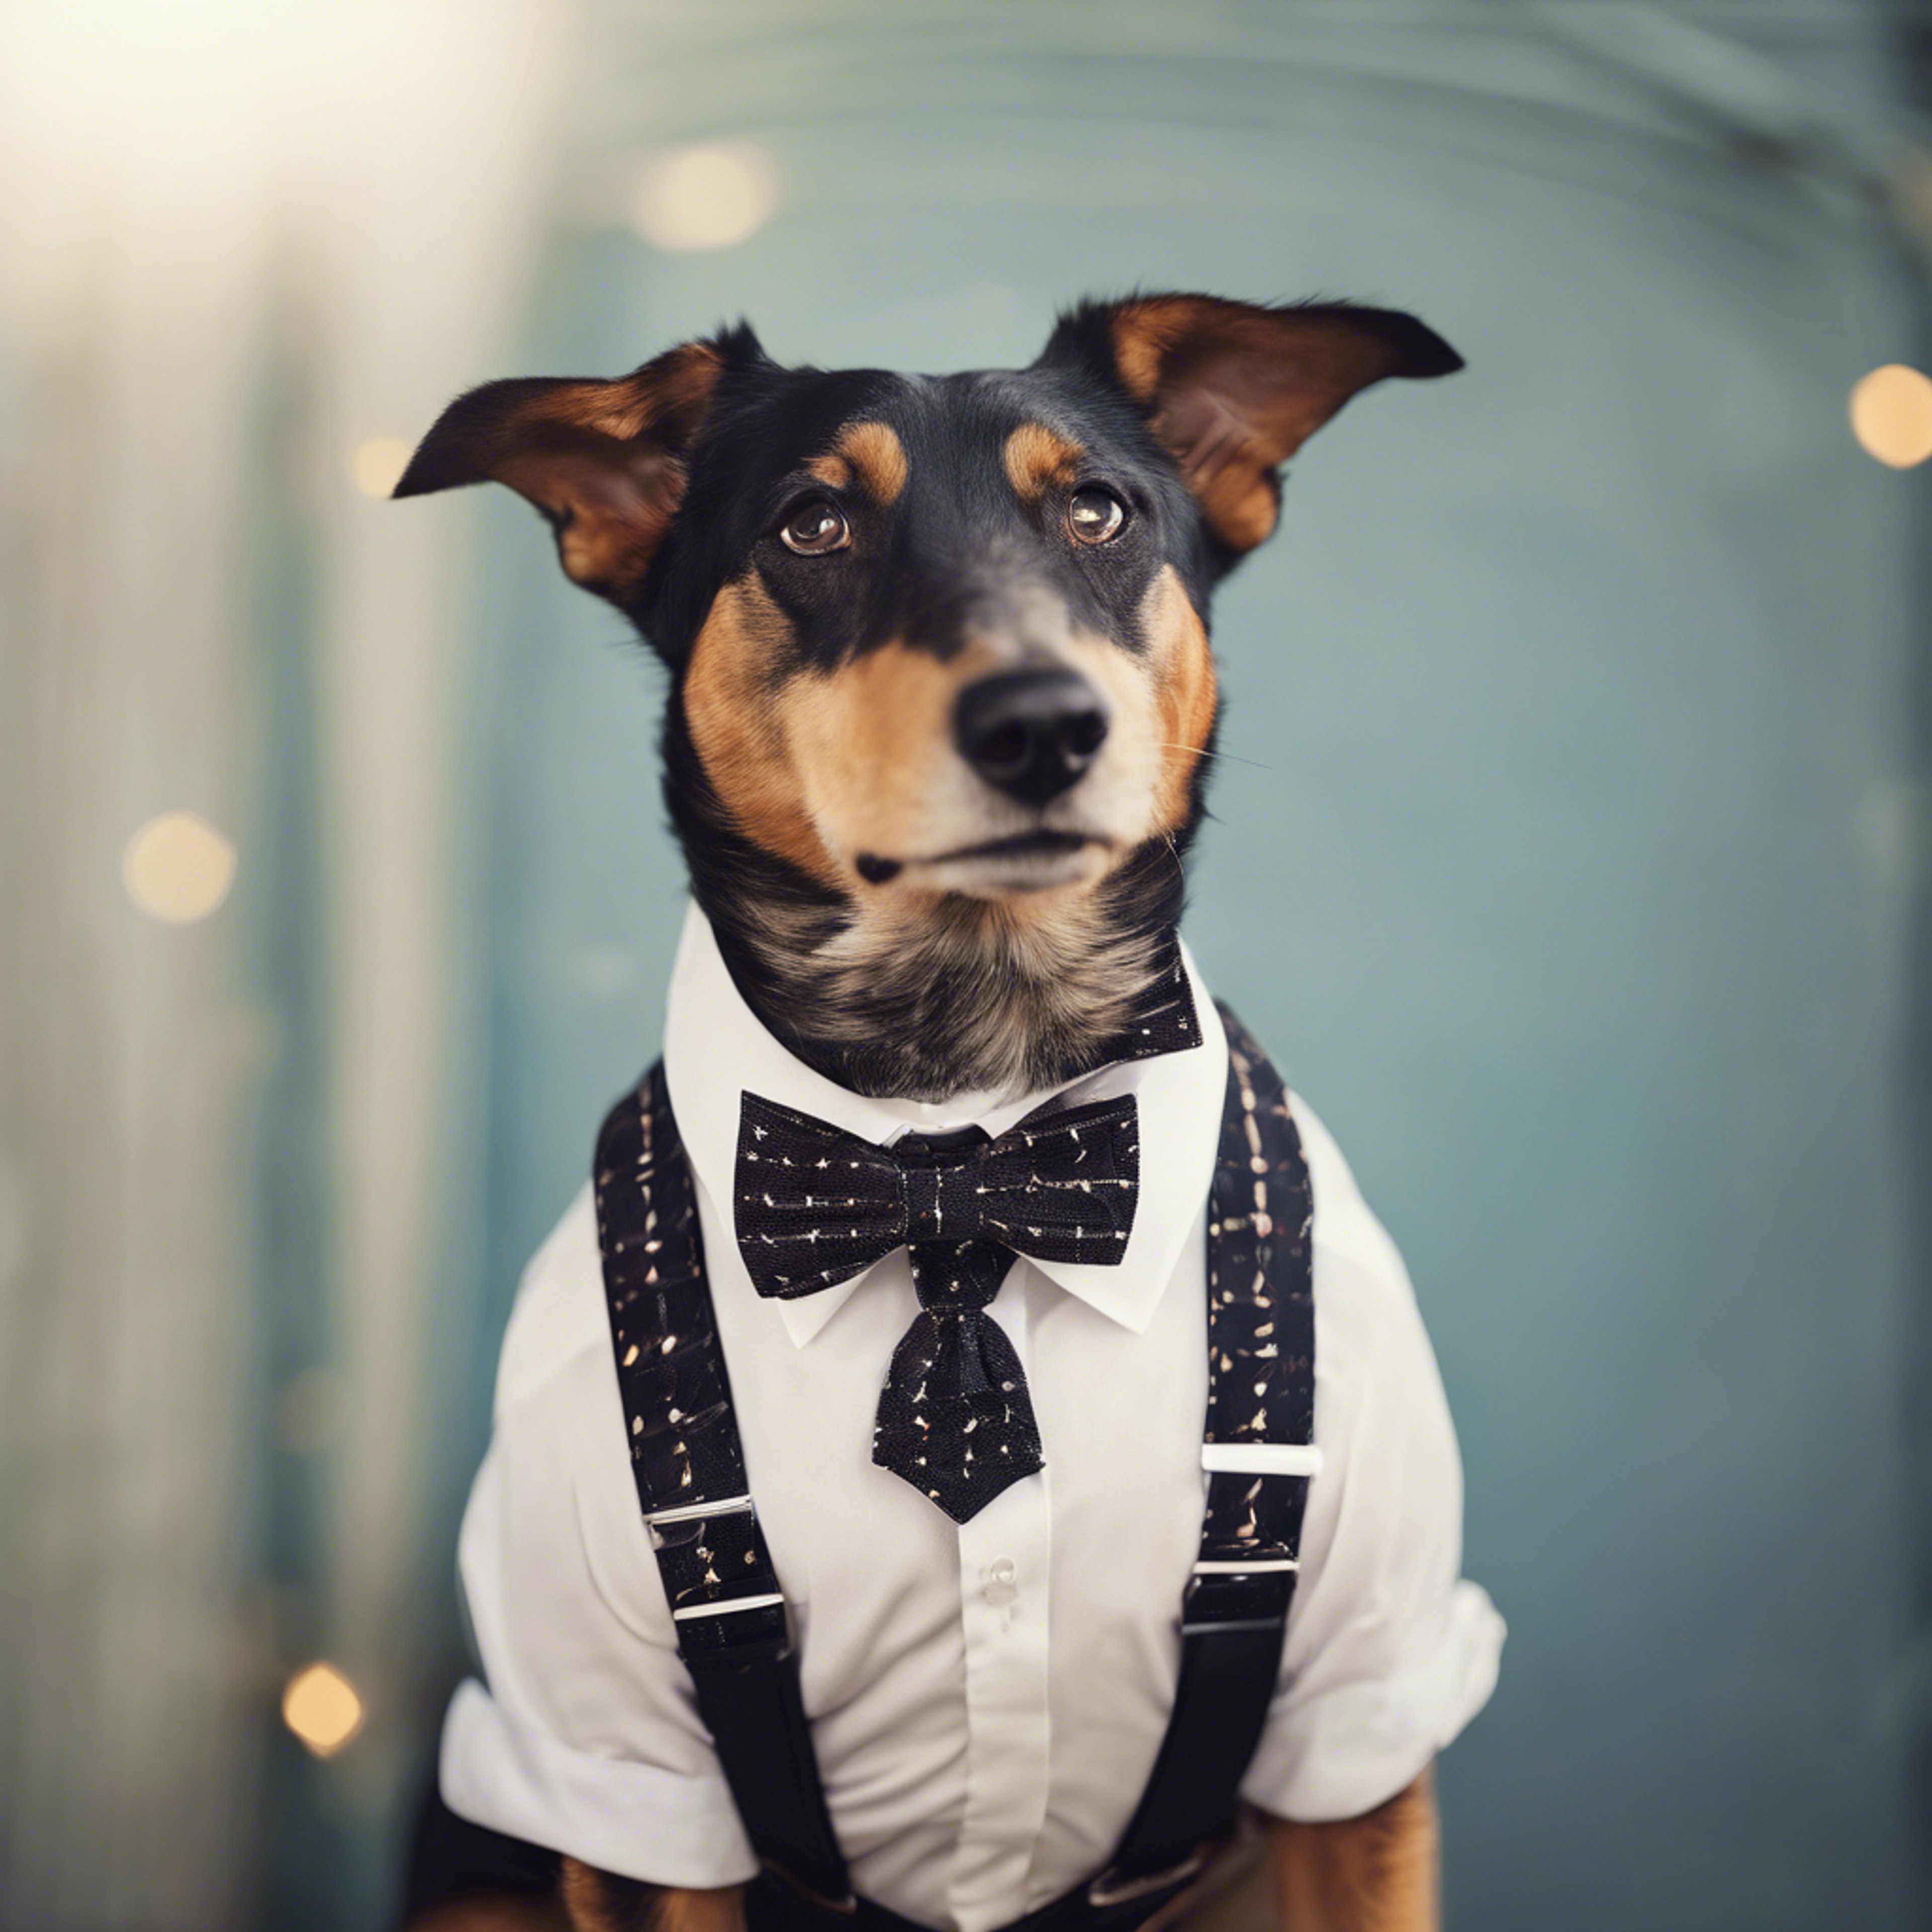 A dapper dog dressed in a cute retro-style outfit, featuring suspenders and bow tie.壁紙[69a1531fb80543609416]